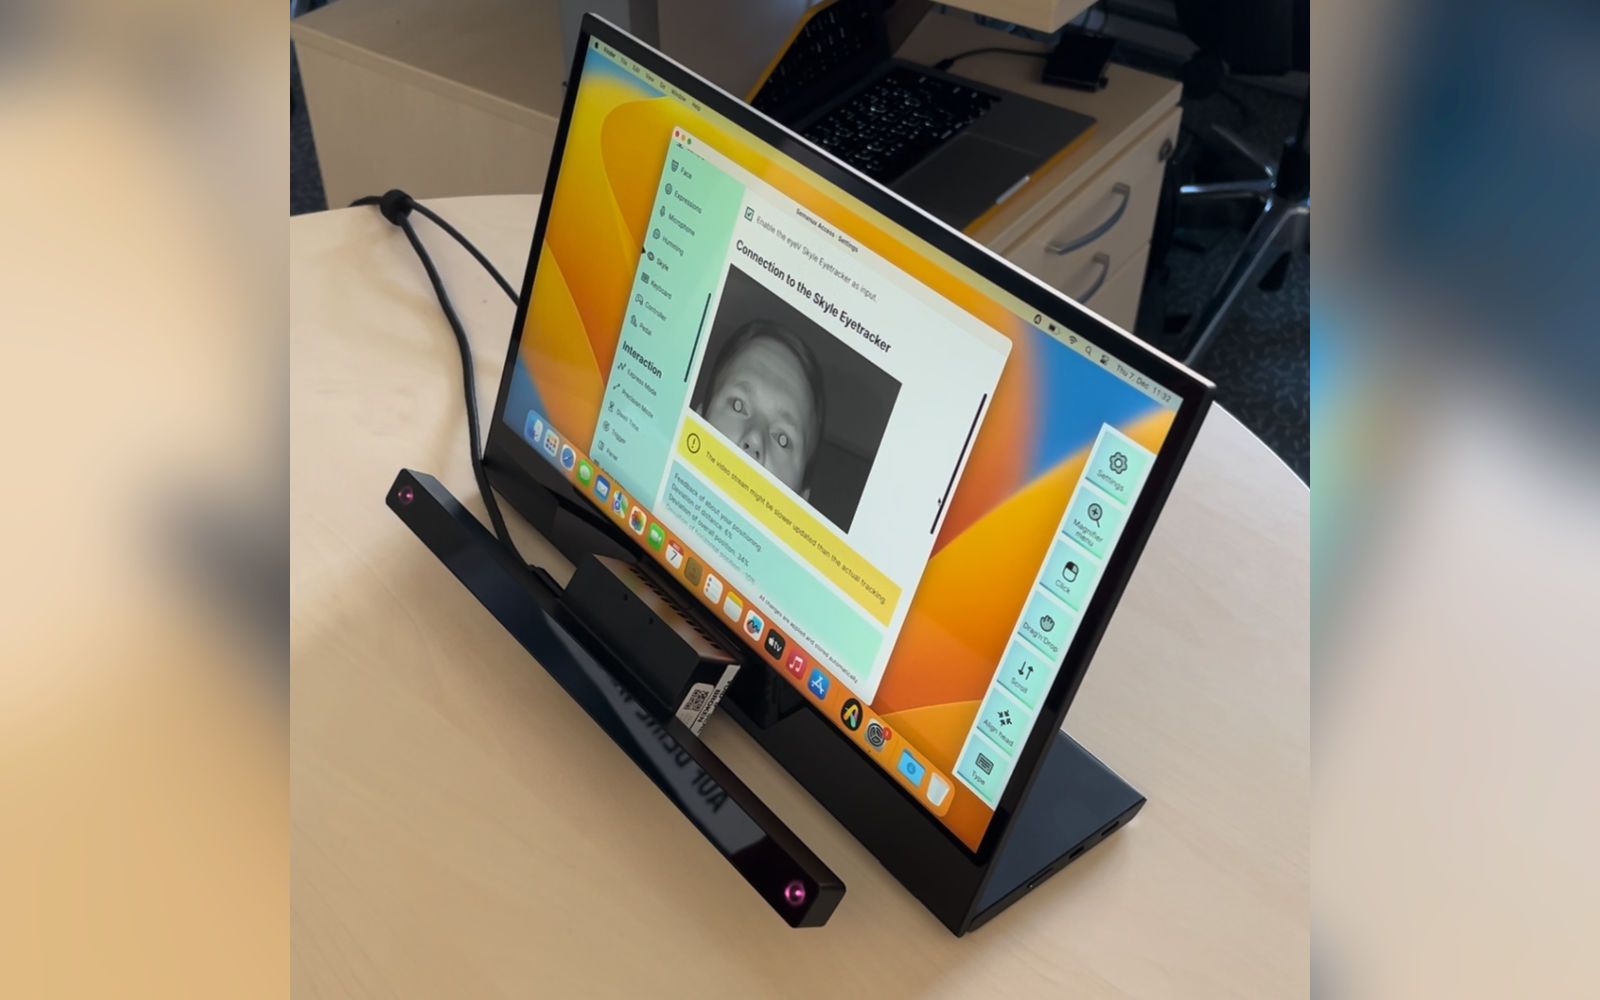 A display with attached eye tracker showing macOS.